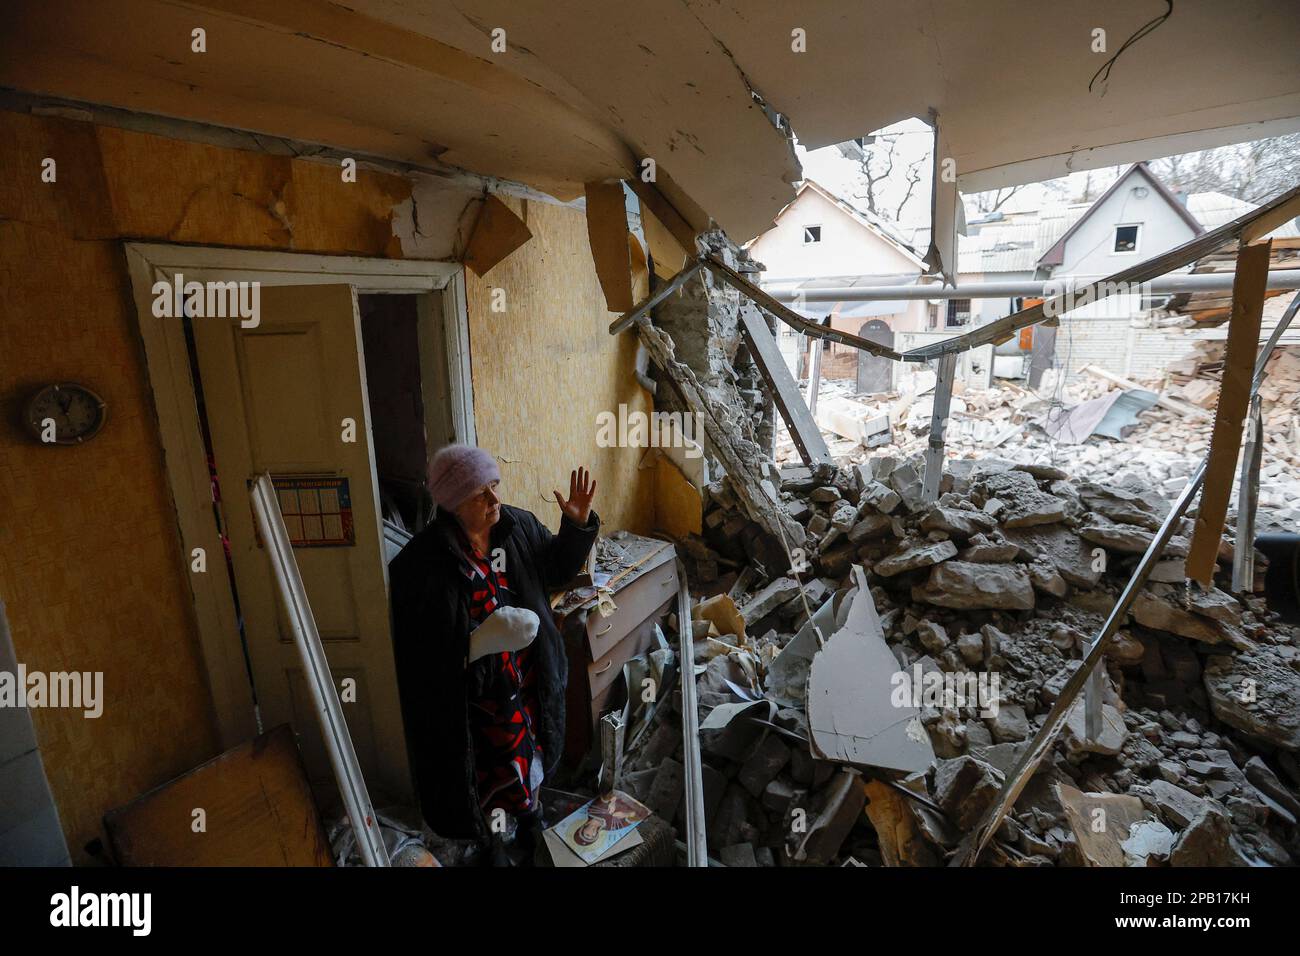 Local resident Svetlana Boiko, 66, who was injured in recent shelling, reacts outside her destroyed house in the course of Russia-Ukraine conflict in Donetsk, Russian-controlled Ukraine, March 12, 2023. REUTERS/Alexander Ermochenko Stock Photo